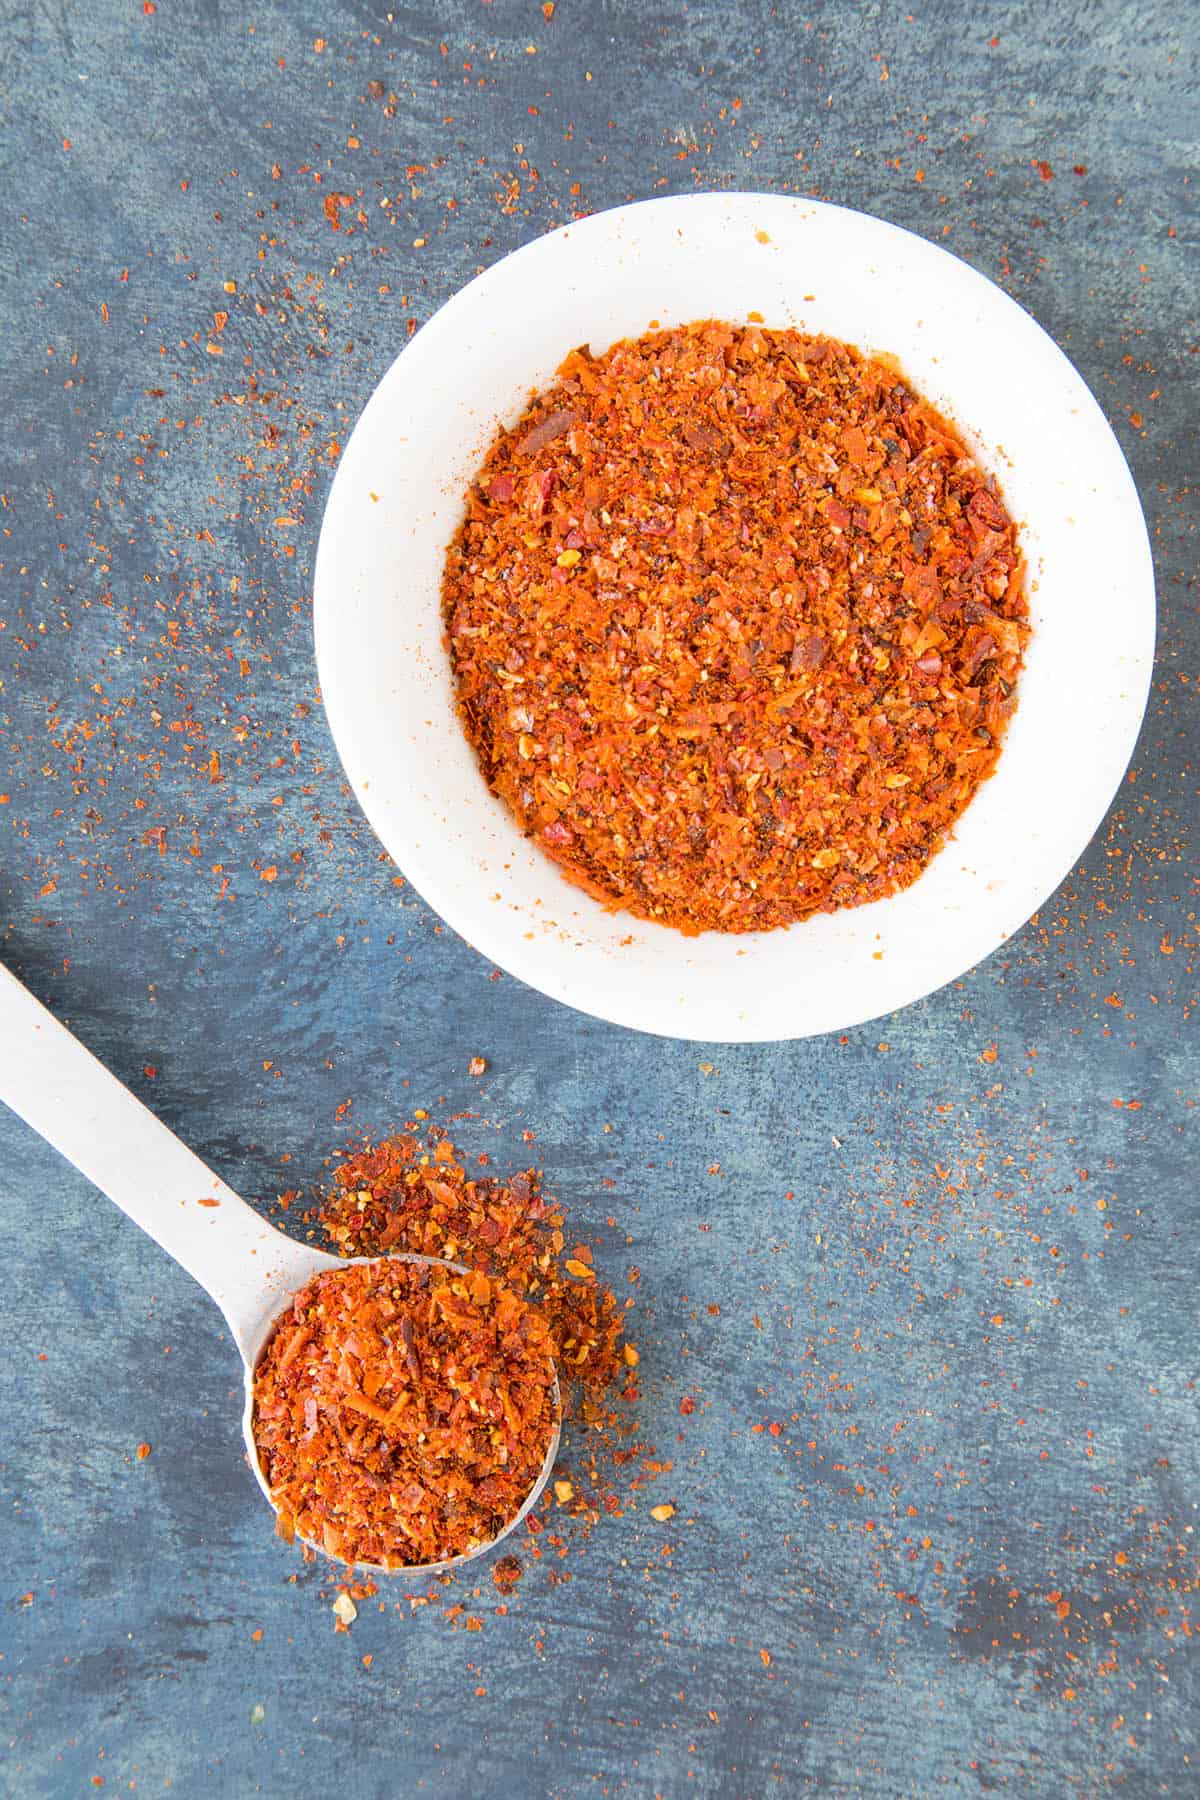 Homemade Roasted Red Jalapeno Chili Powder looking absolutely stunning.